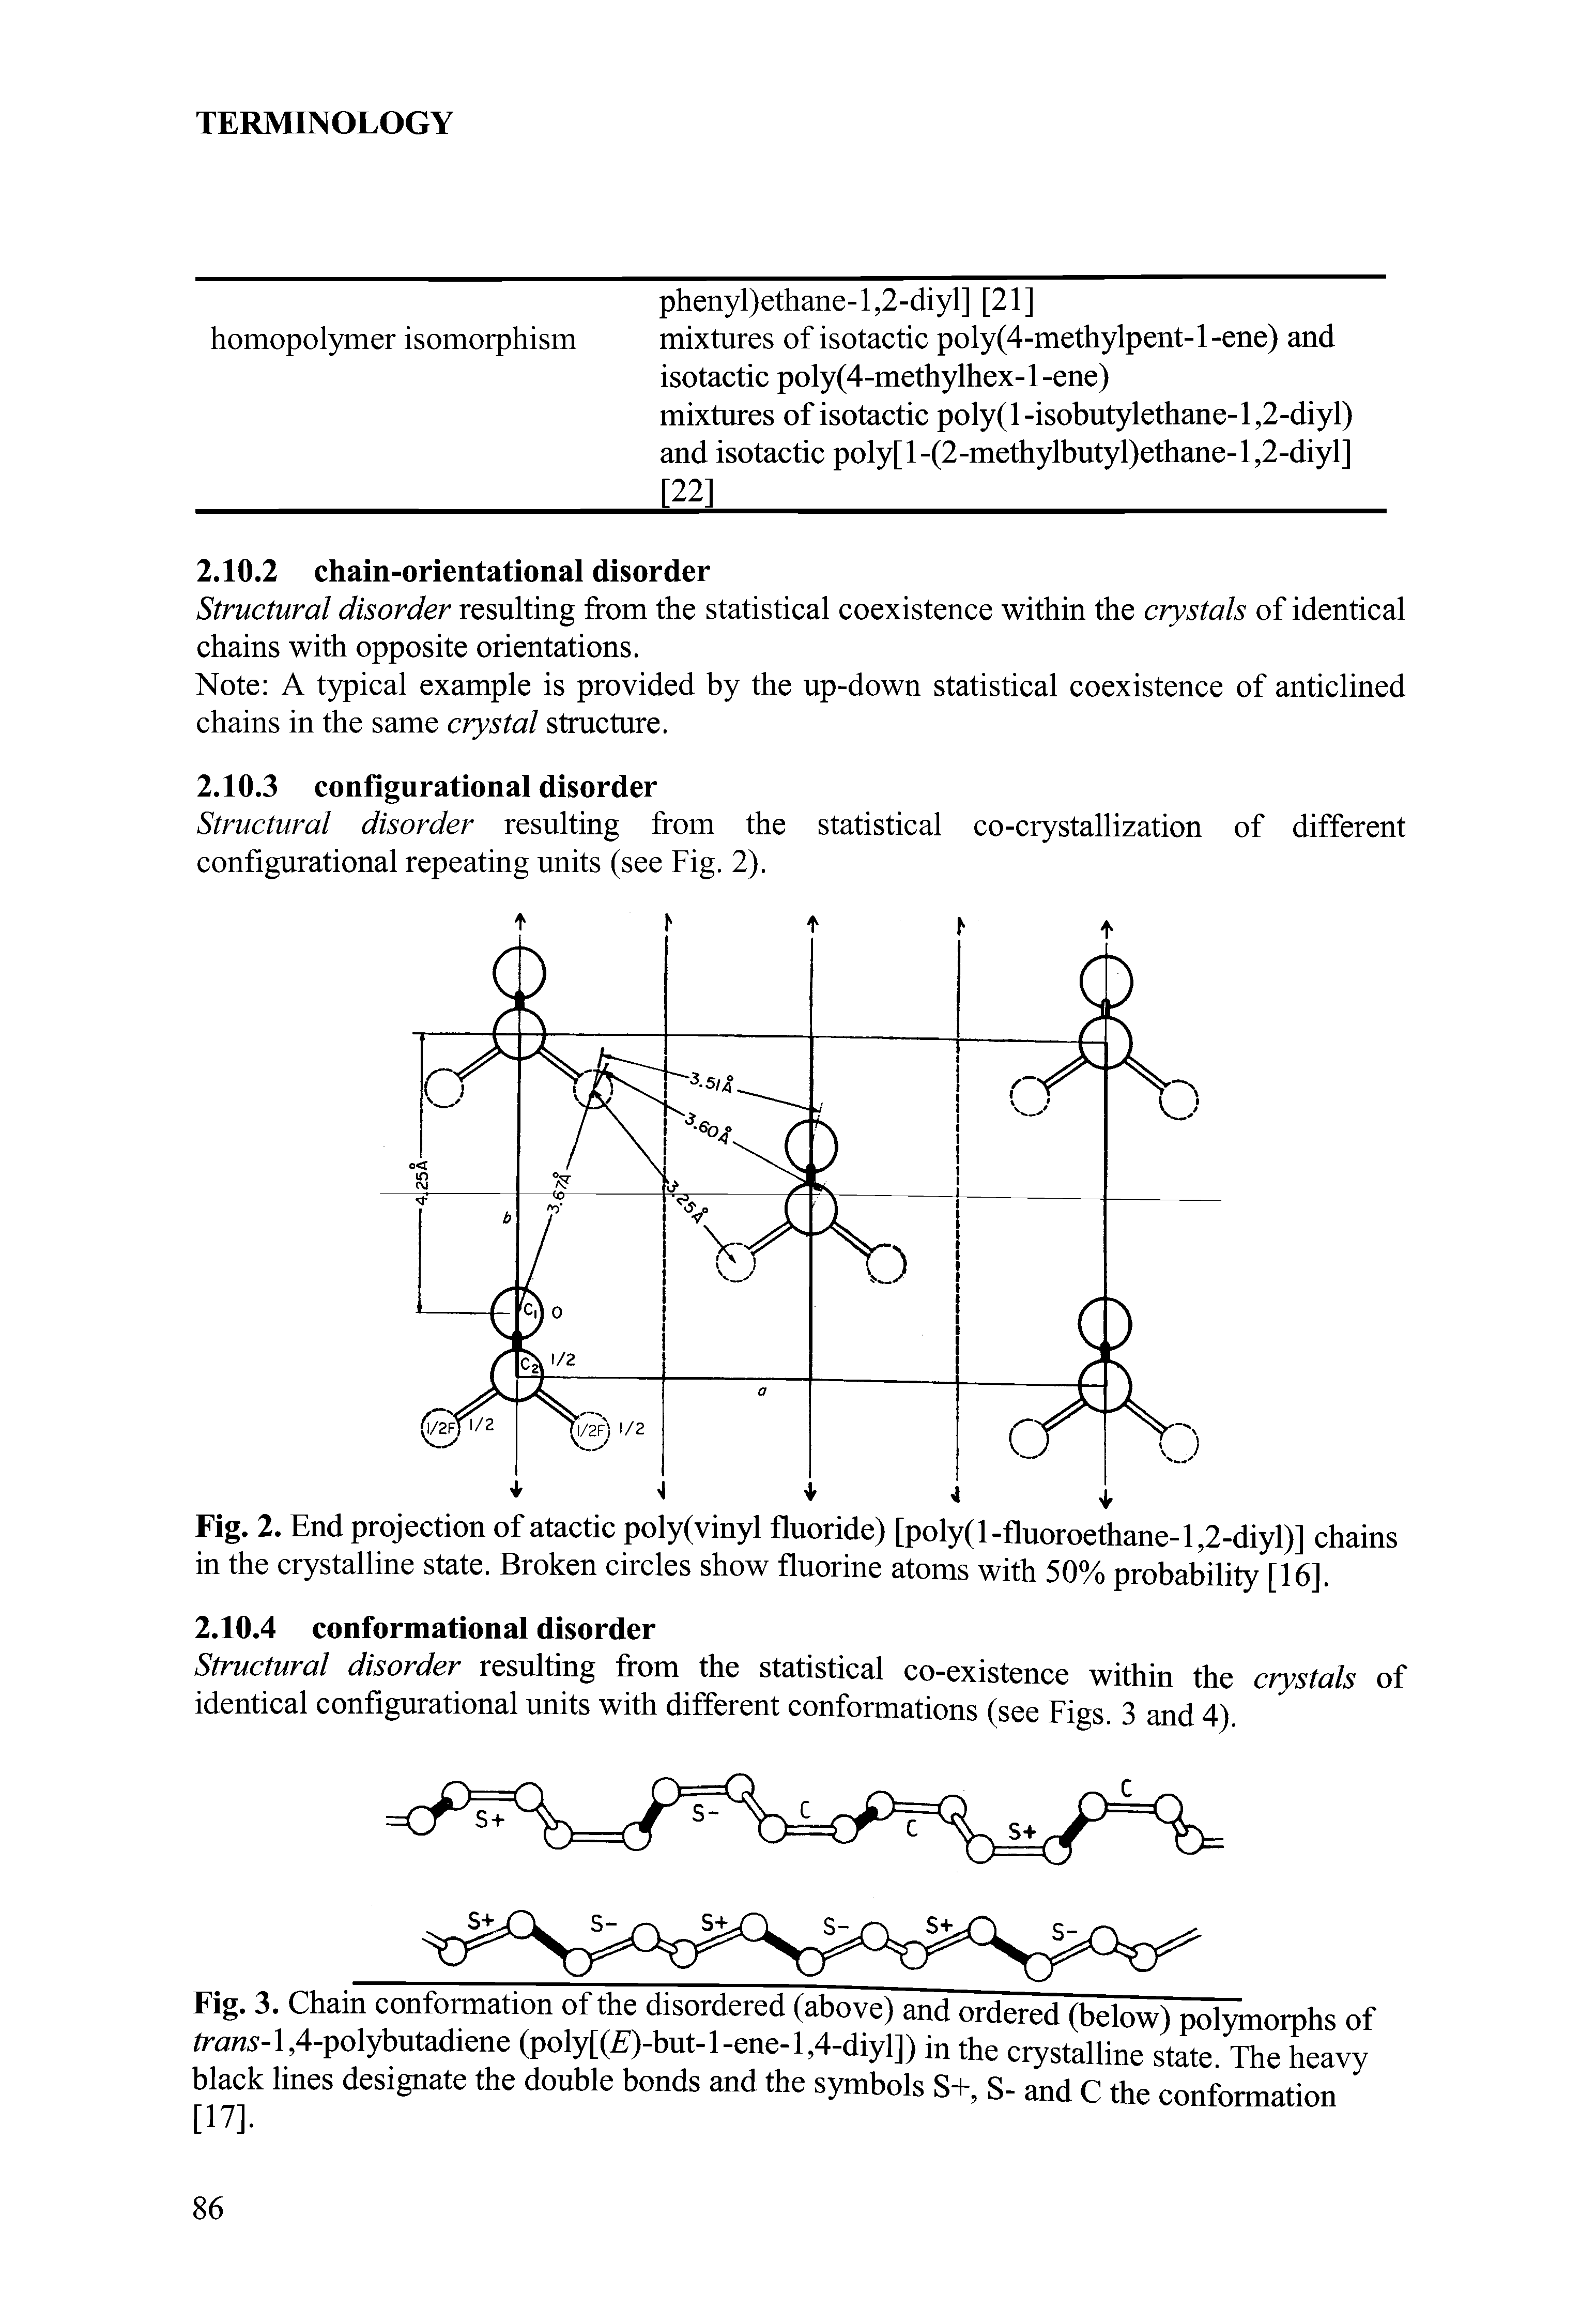 Fig. 2. End projection of atactic poly(vinyl fluoride) [poly(l-fluoroethane-l,2-diyl)] chains in the crystalline state. Broken circles show fluorine atoms with 50% probability [16].